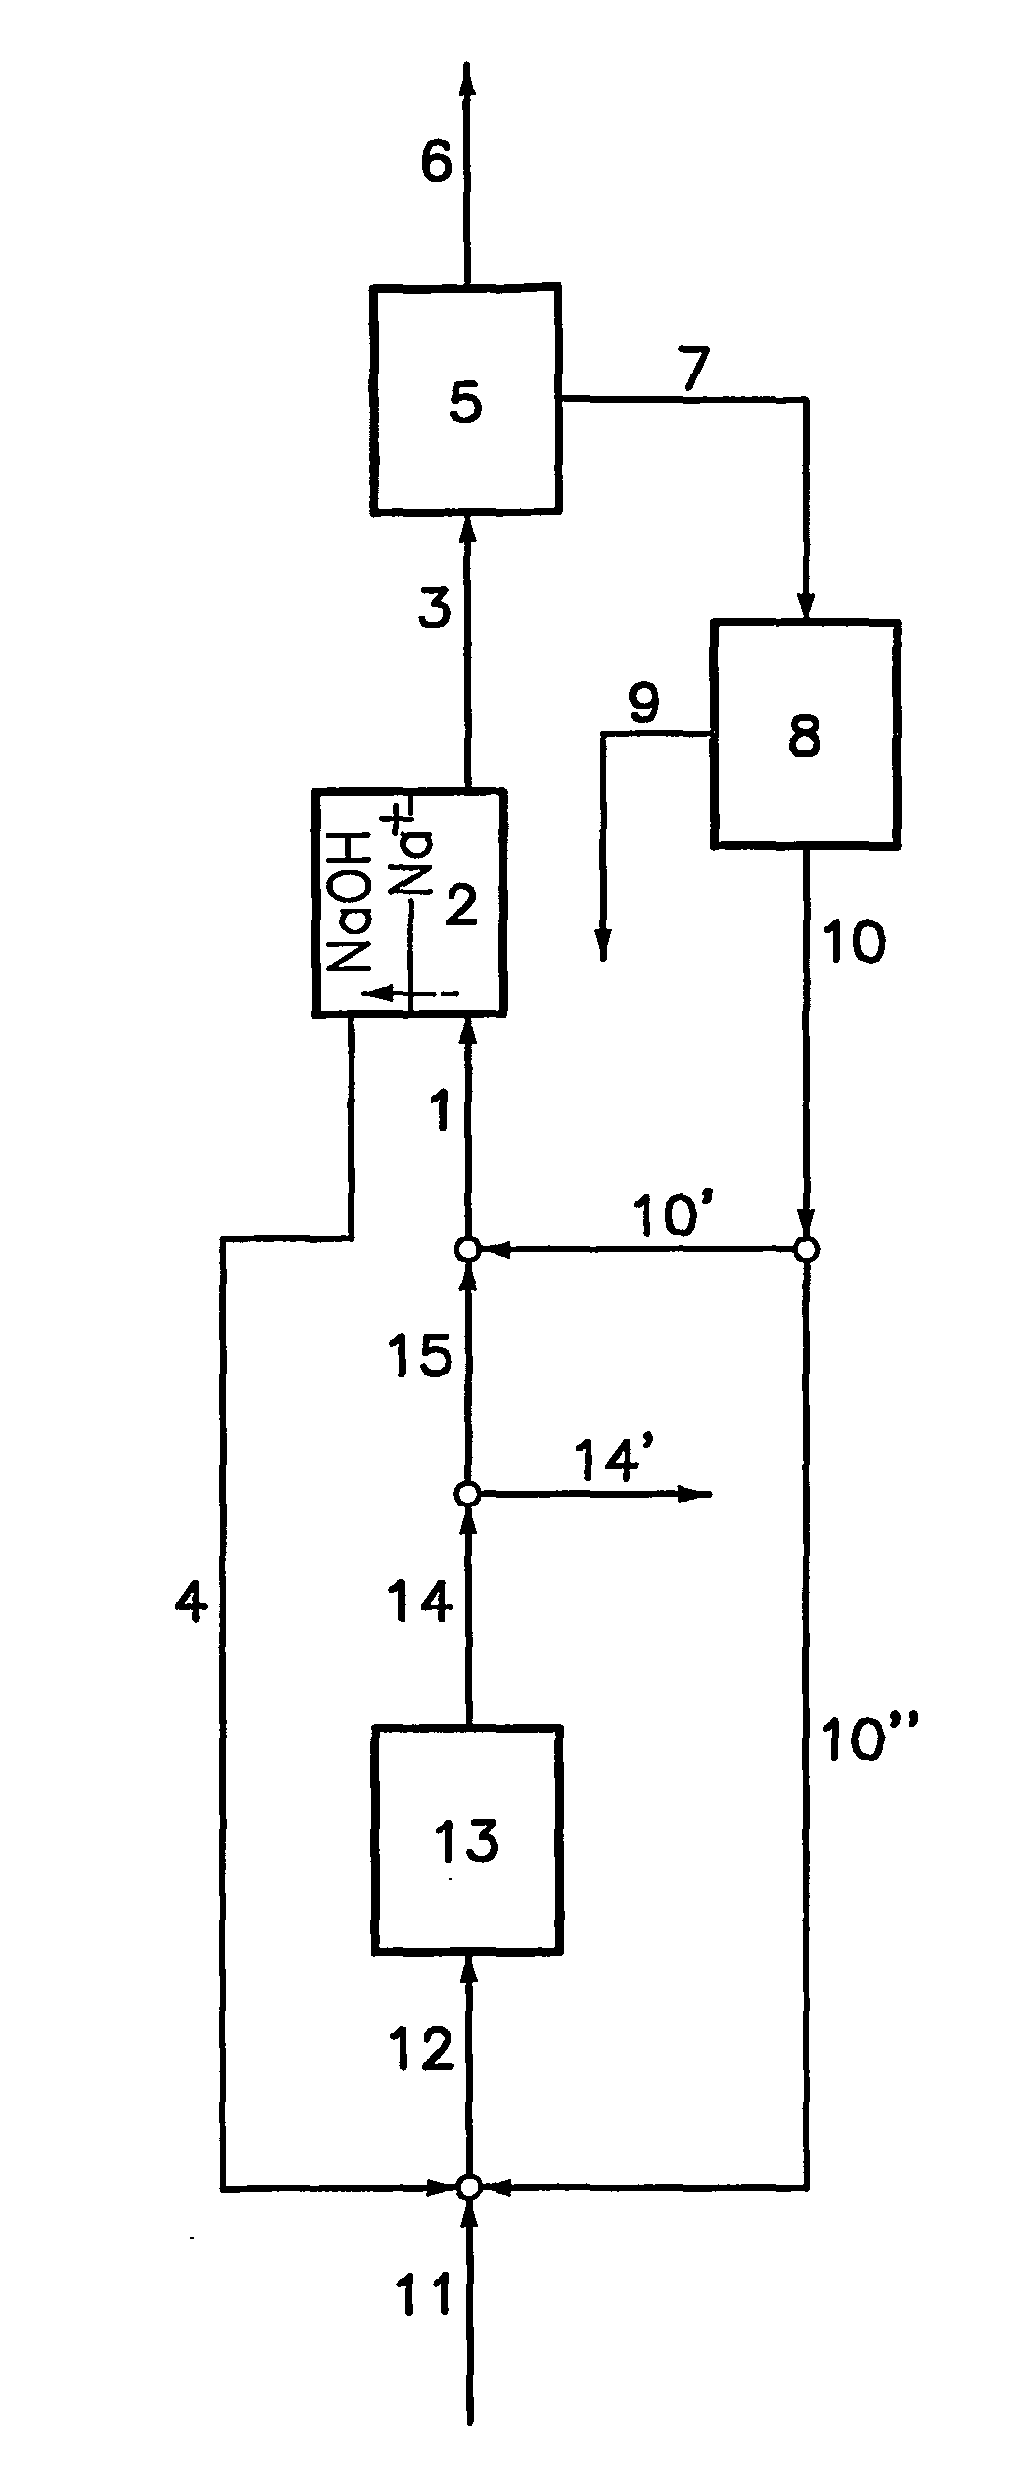 Process for producing sodium carbonate and/or sodium bicarbonate from an ore mineral comprising sodium bicarbonate